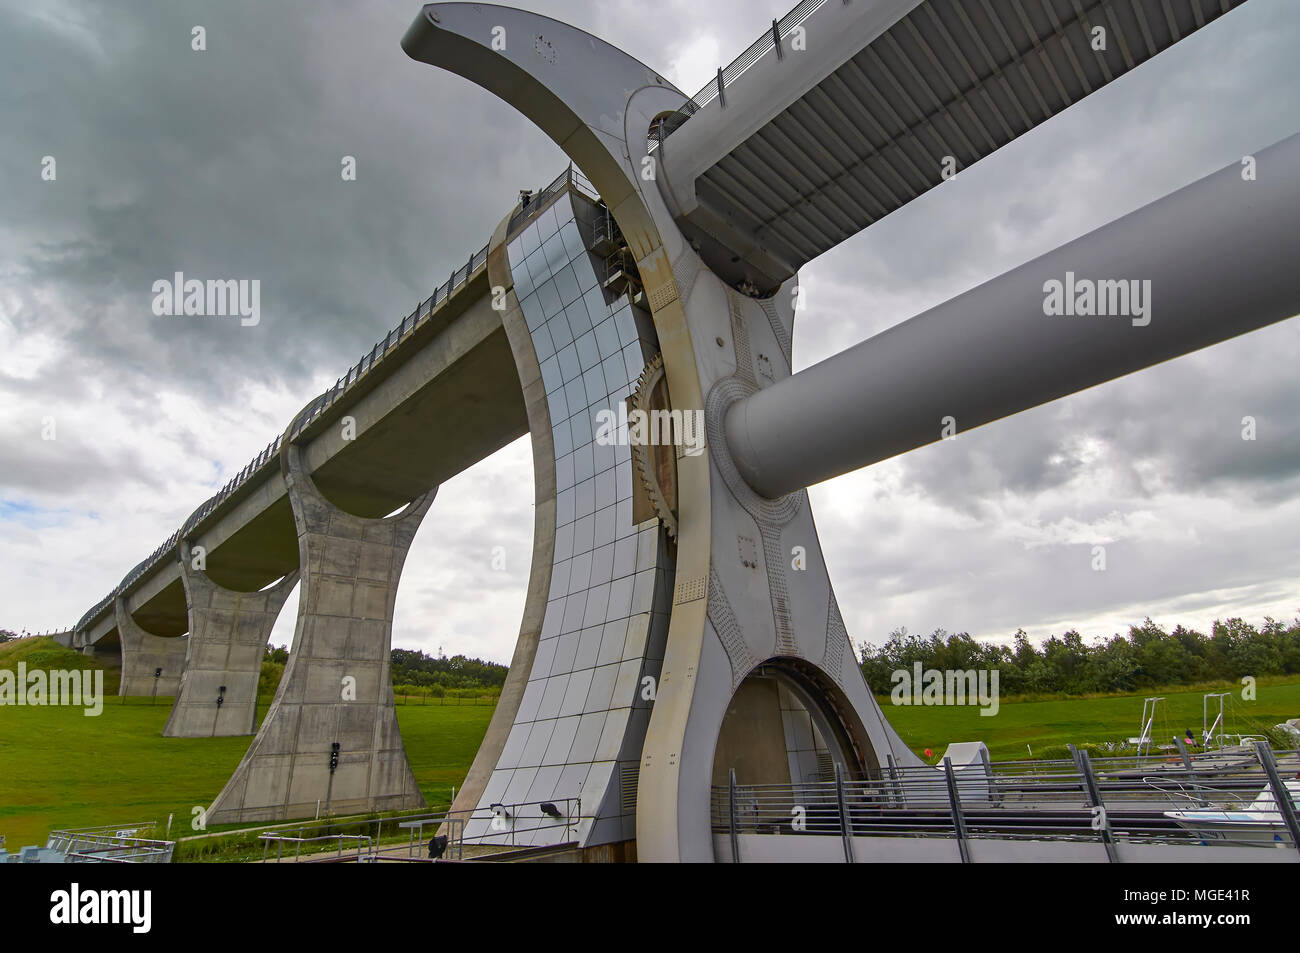 The lock passage for the Canal Boats entering the Union Canal from the Forth and Clyde Canal via the Falkirk Wheel, in Falkirk, Scotland. Stock Photo